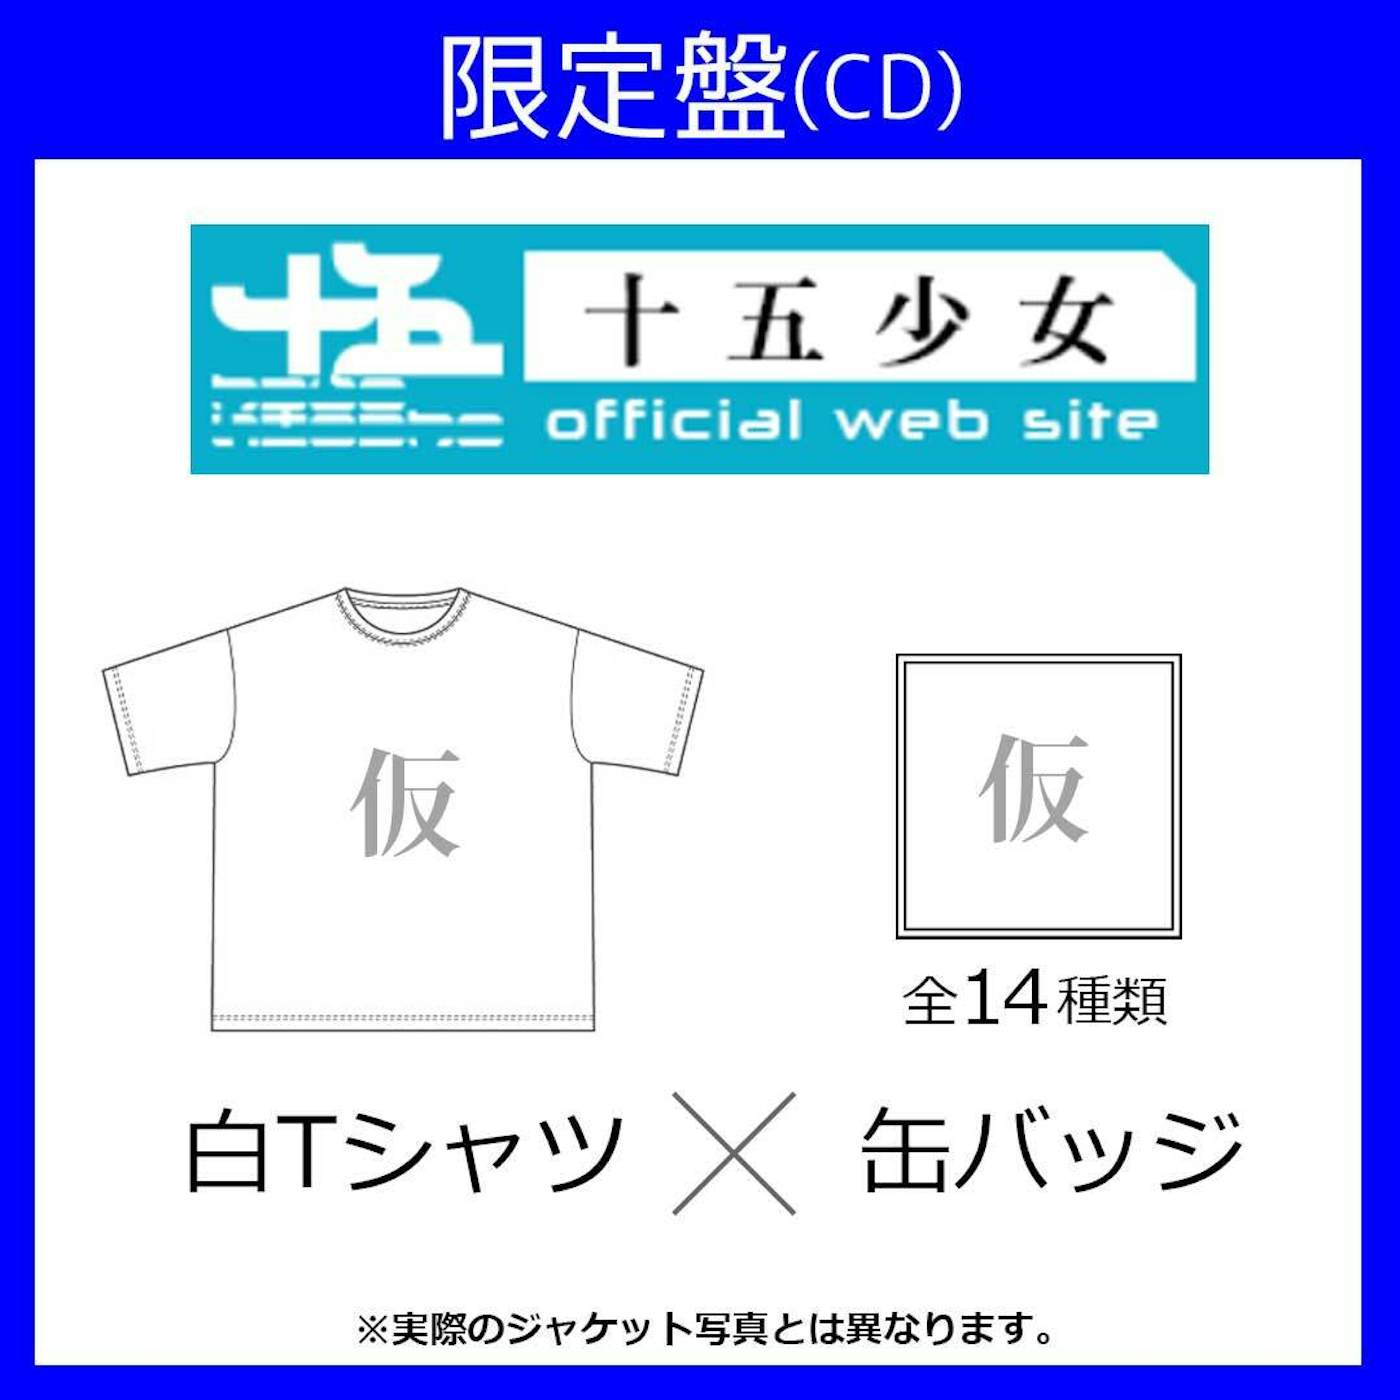 Fifteen voices ≪限定セット：缶バッジ×白Tシャツ(XL)≫SILENTHATED(2枚組AL+スマプラ)